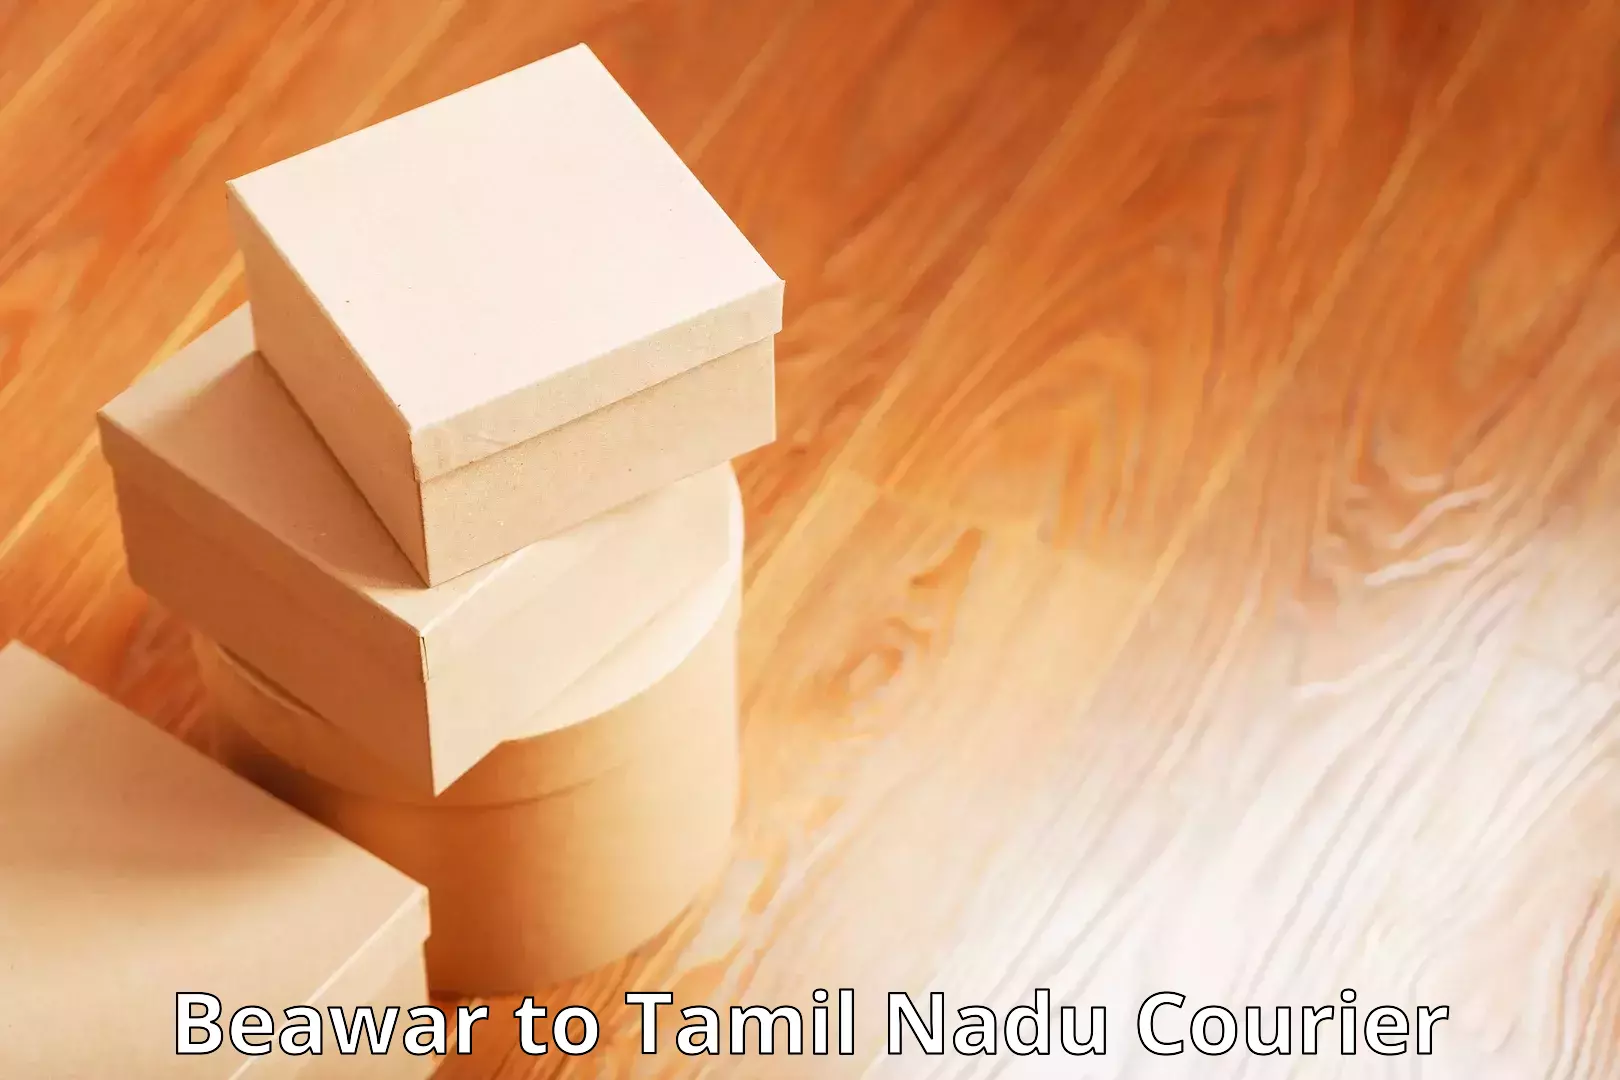 Multi-service courier options Beawar to Tamil Nadu